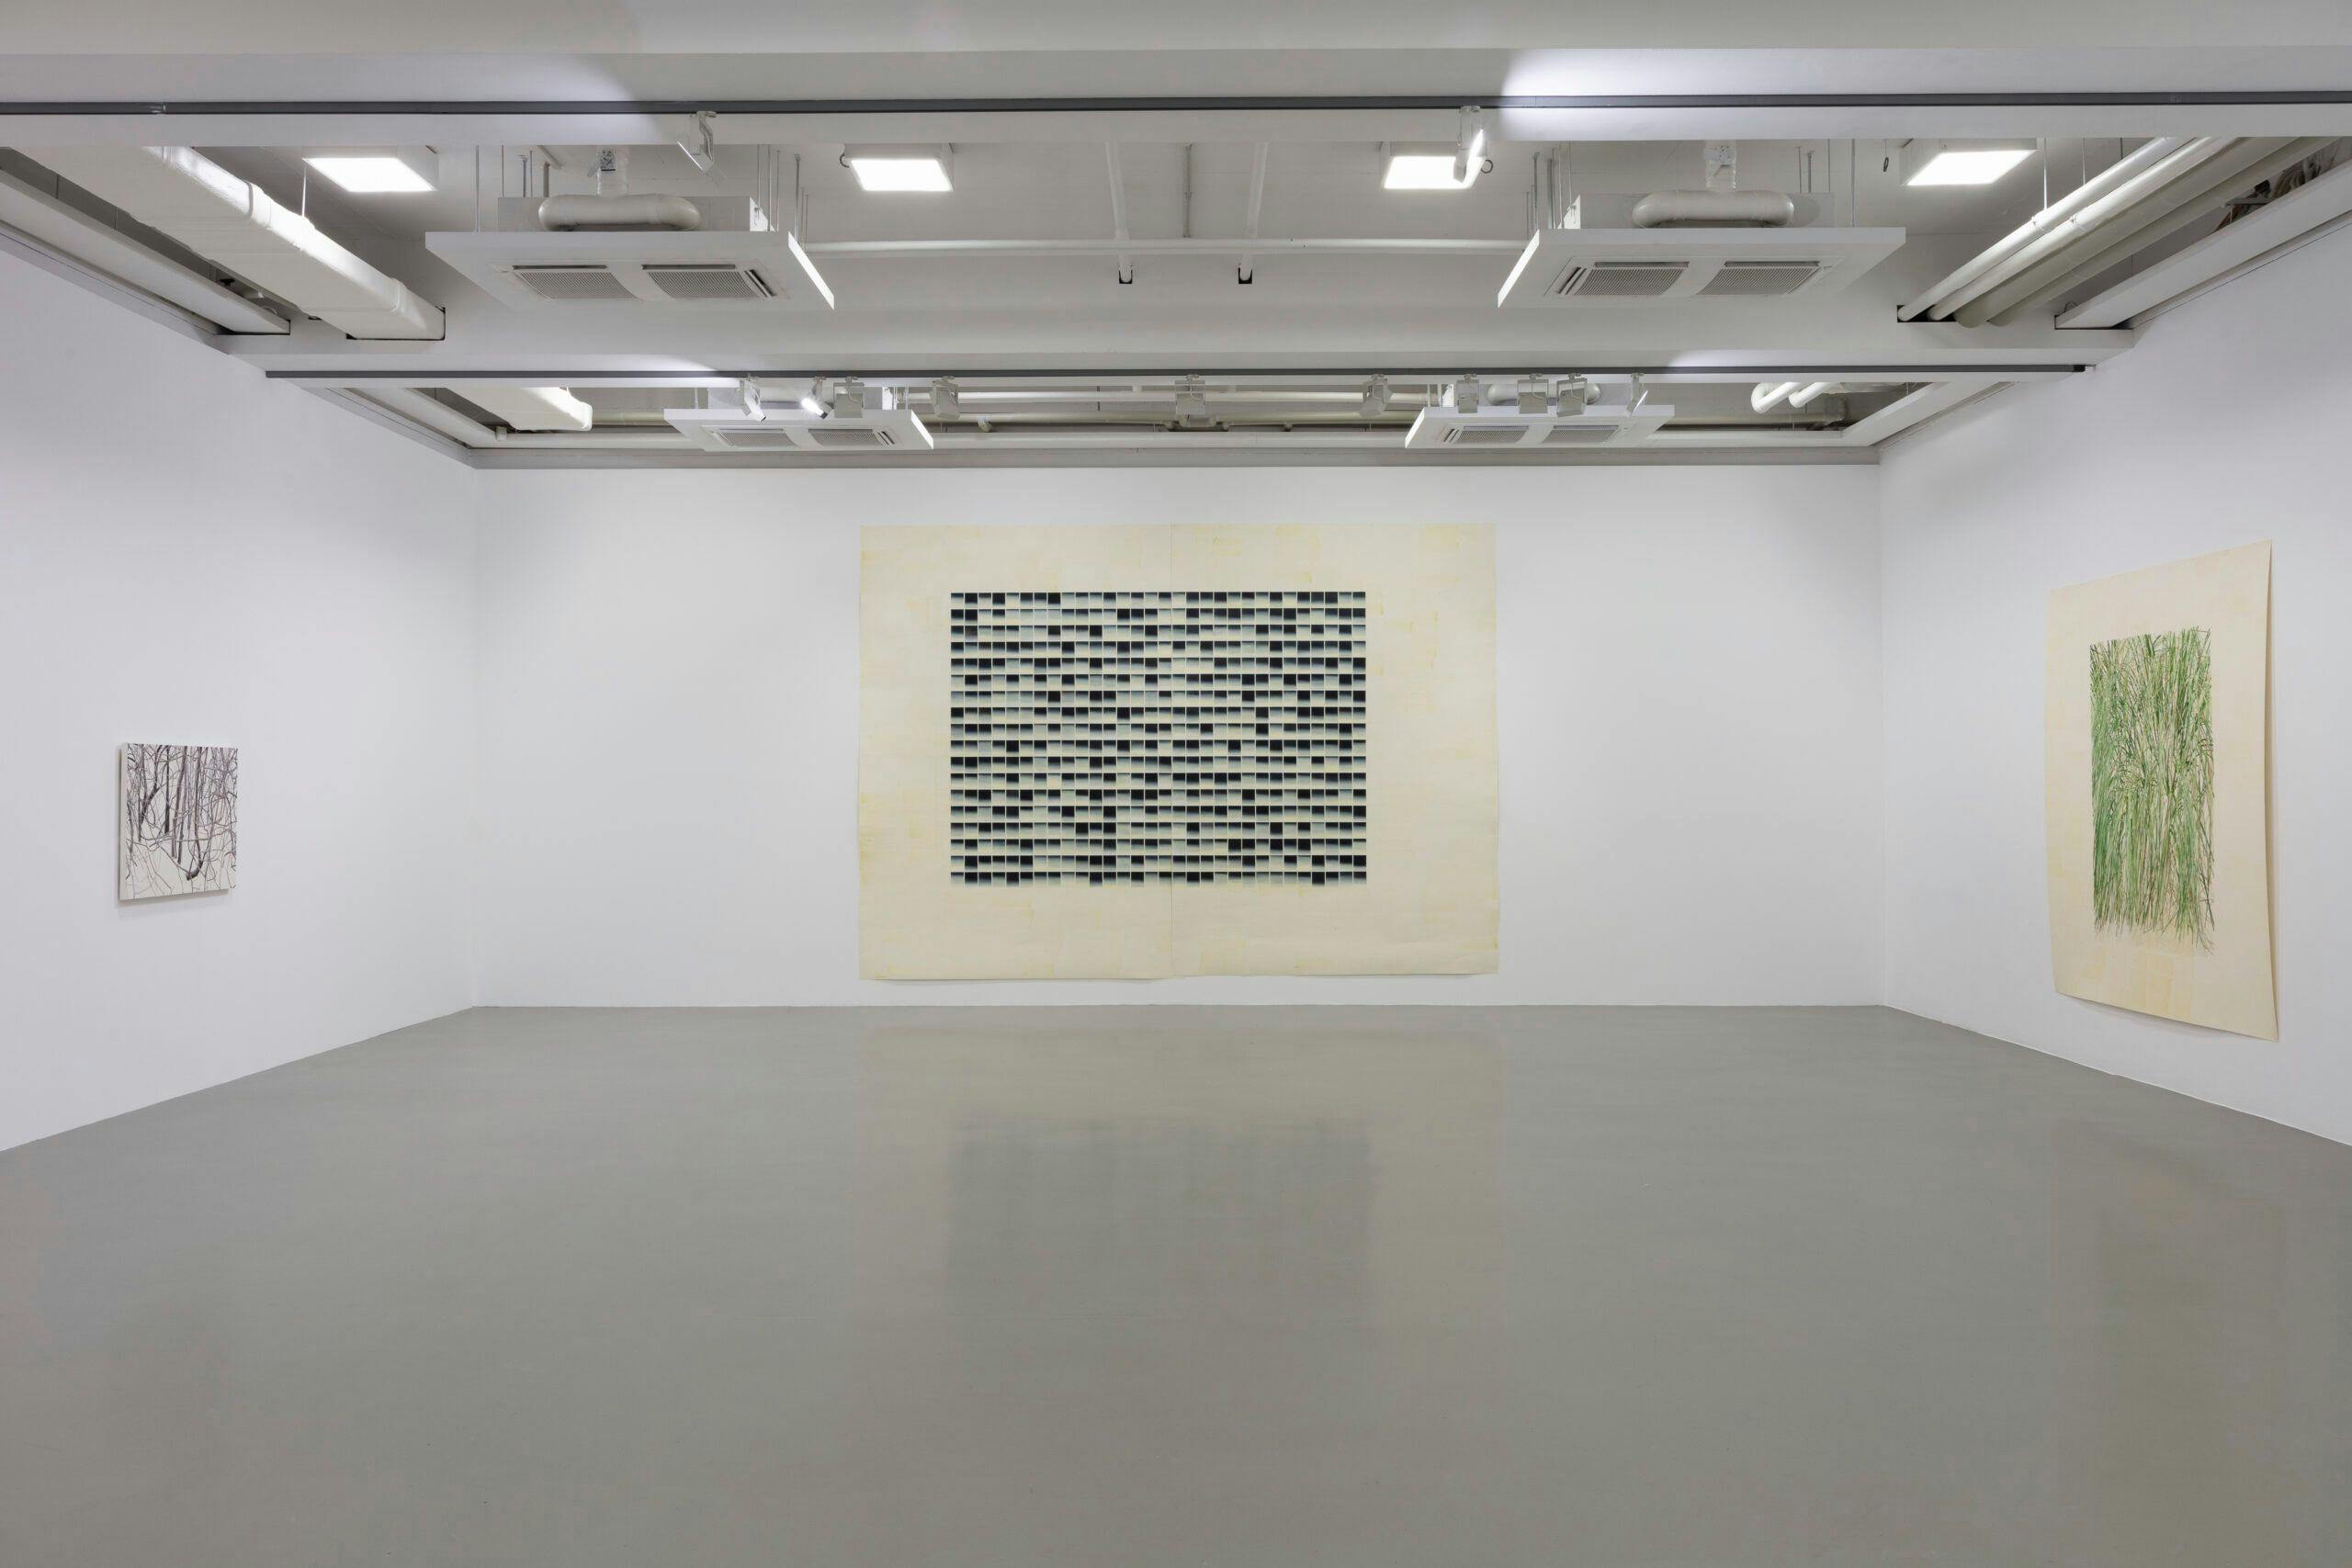 Installation view of an exhibition titled, Toba Khedoori, at the Fridericianum in Kassel, dated 2021.